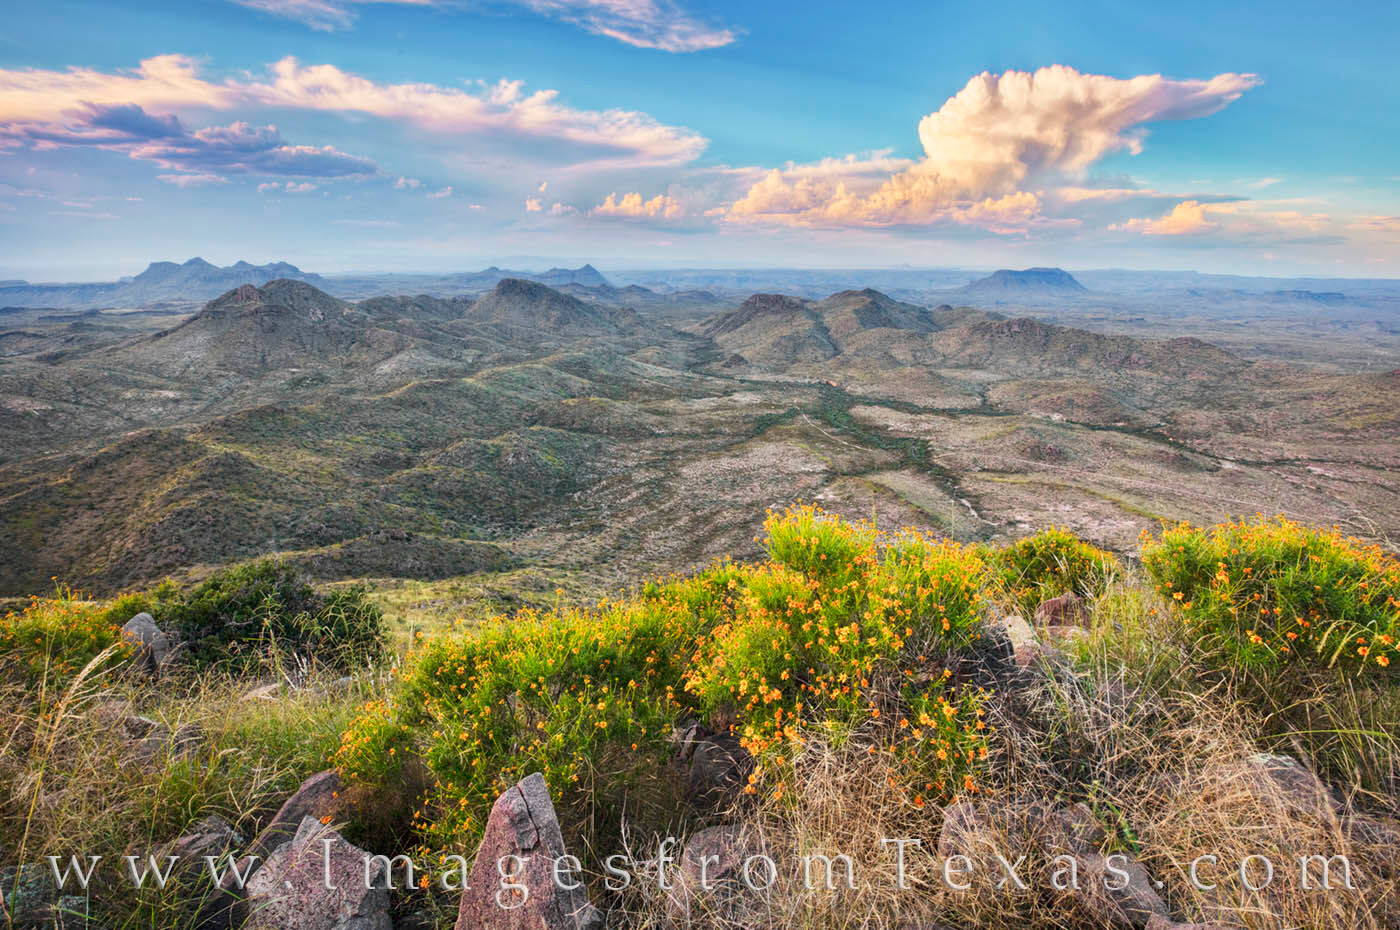 On a perfect fall afternoon, the view from the highest point in Big Bend Ranh State Park - Oso Mountain - offers the rugged west...